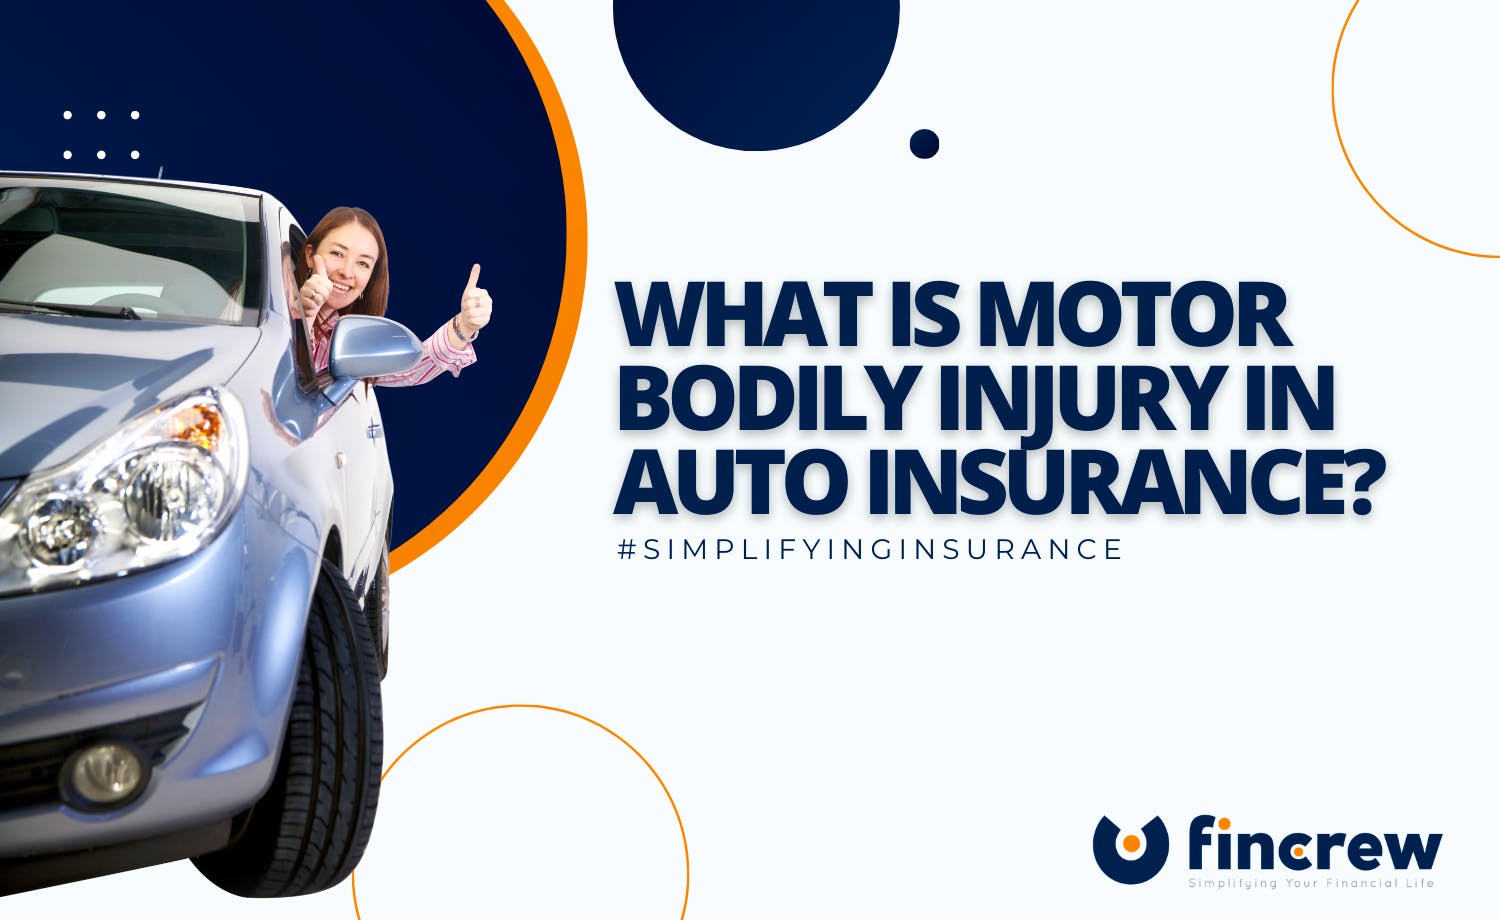 Motor Bodily Injury In Auto Insurance